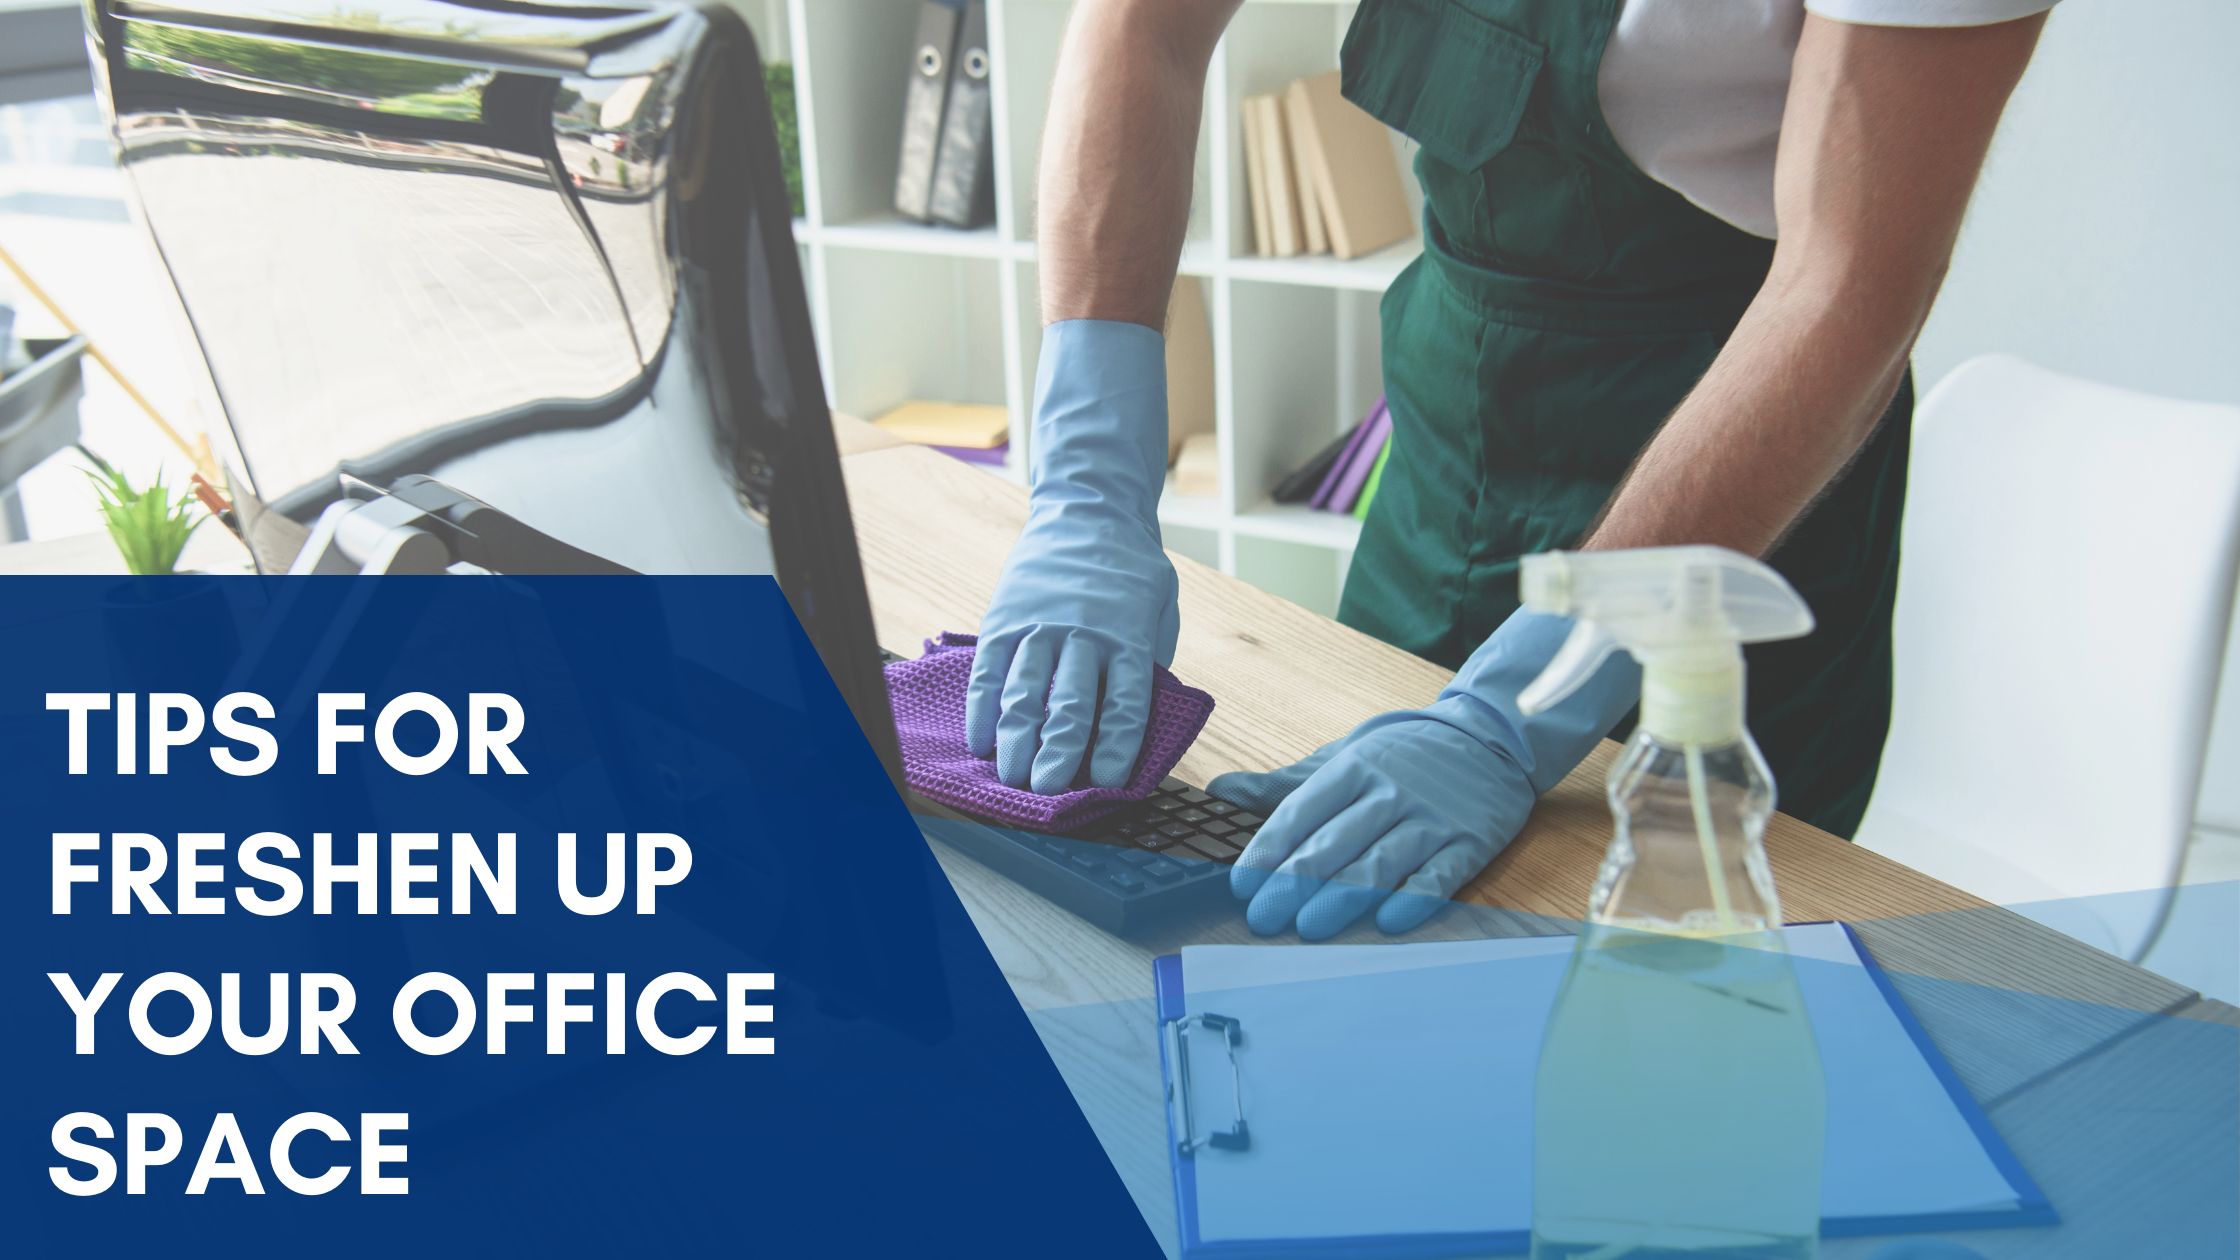 Tips to Freshen Up Your Office Space